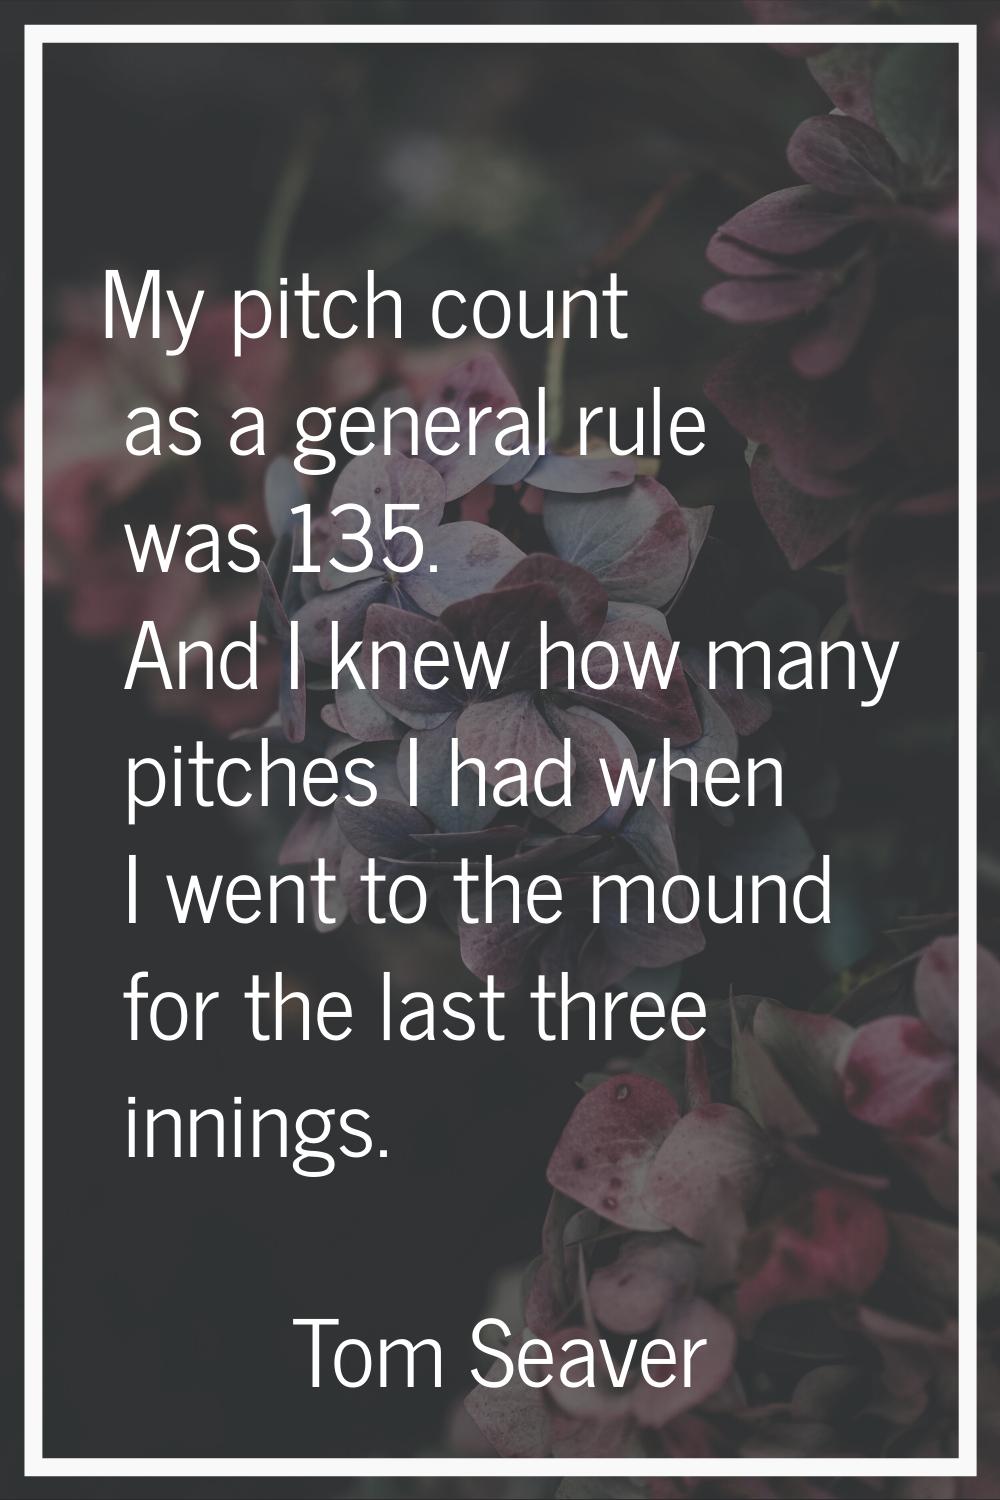 My pitch count as a general rule was 135. And I knew how many pitches I had when I went to the moun